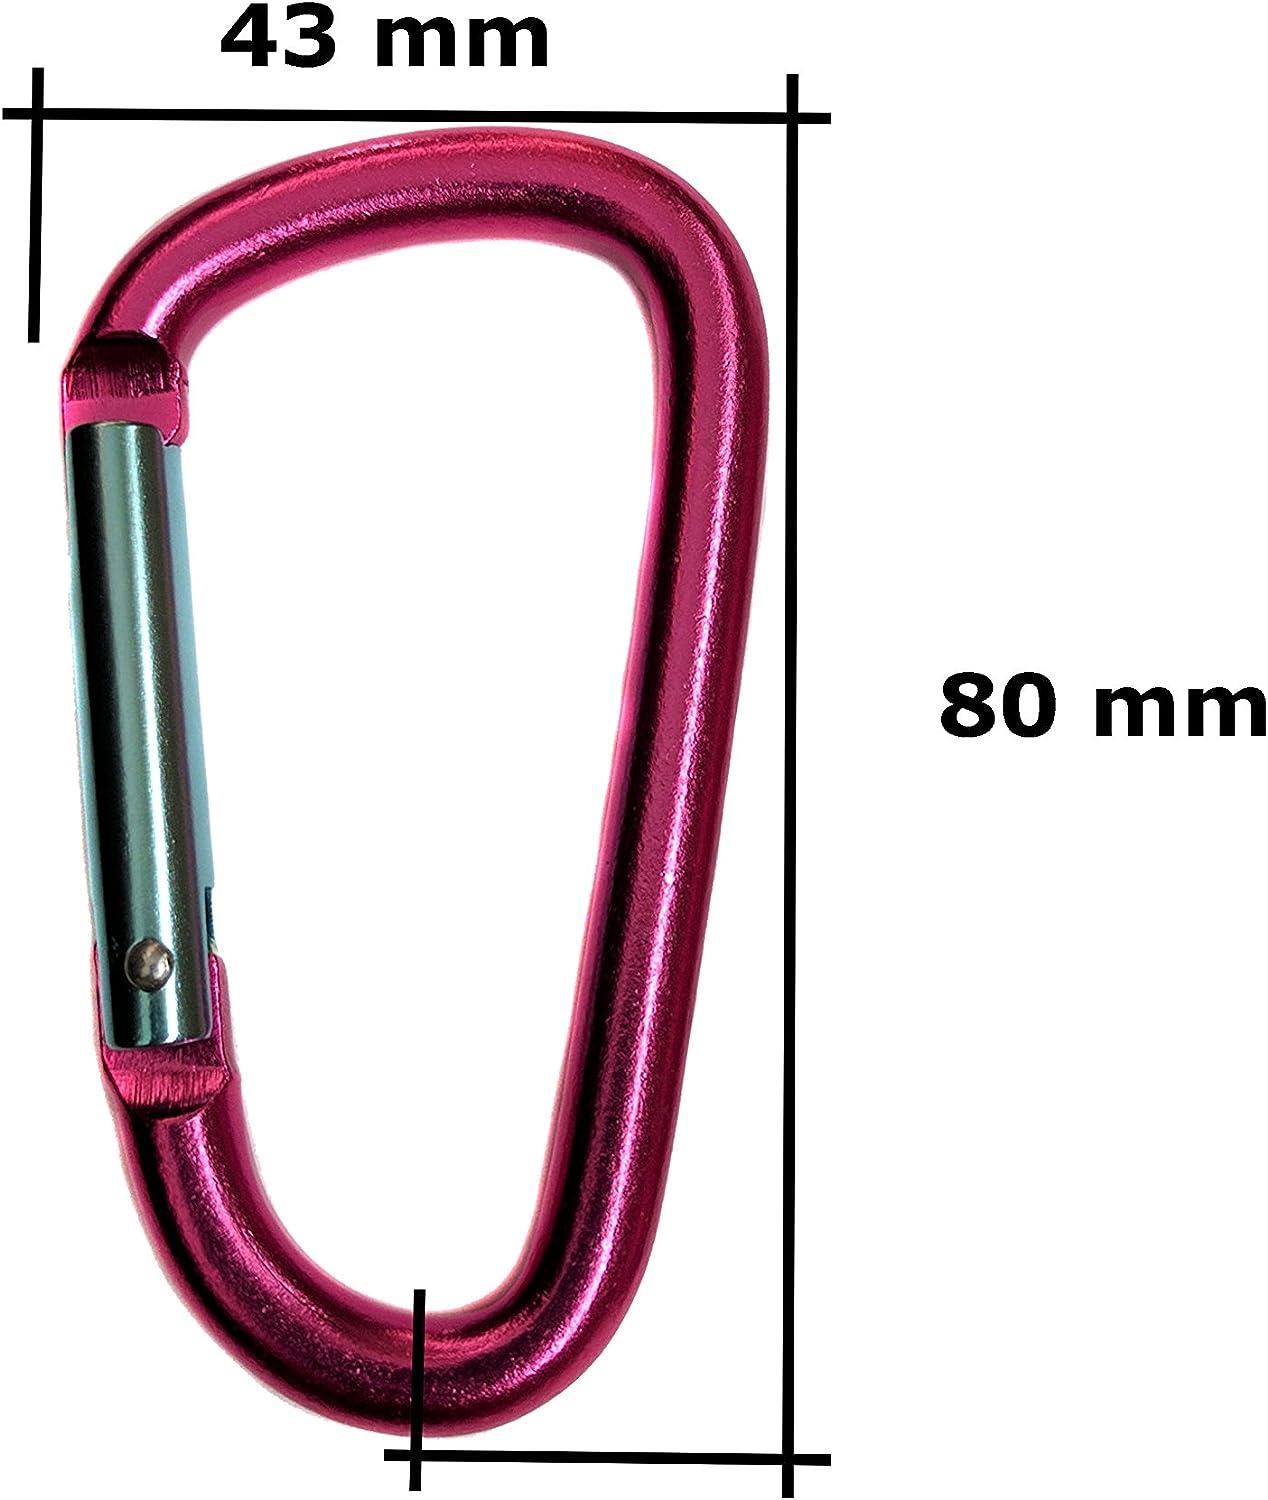 ABCOOL Small Keychain Clips Mini Carabiner - Micro Tiny Small Auto Locking D-Shape Spring Loaded Wire Gate